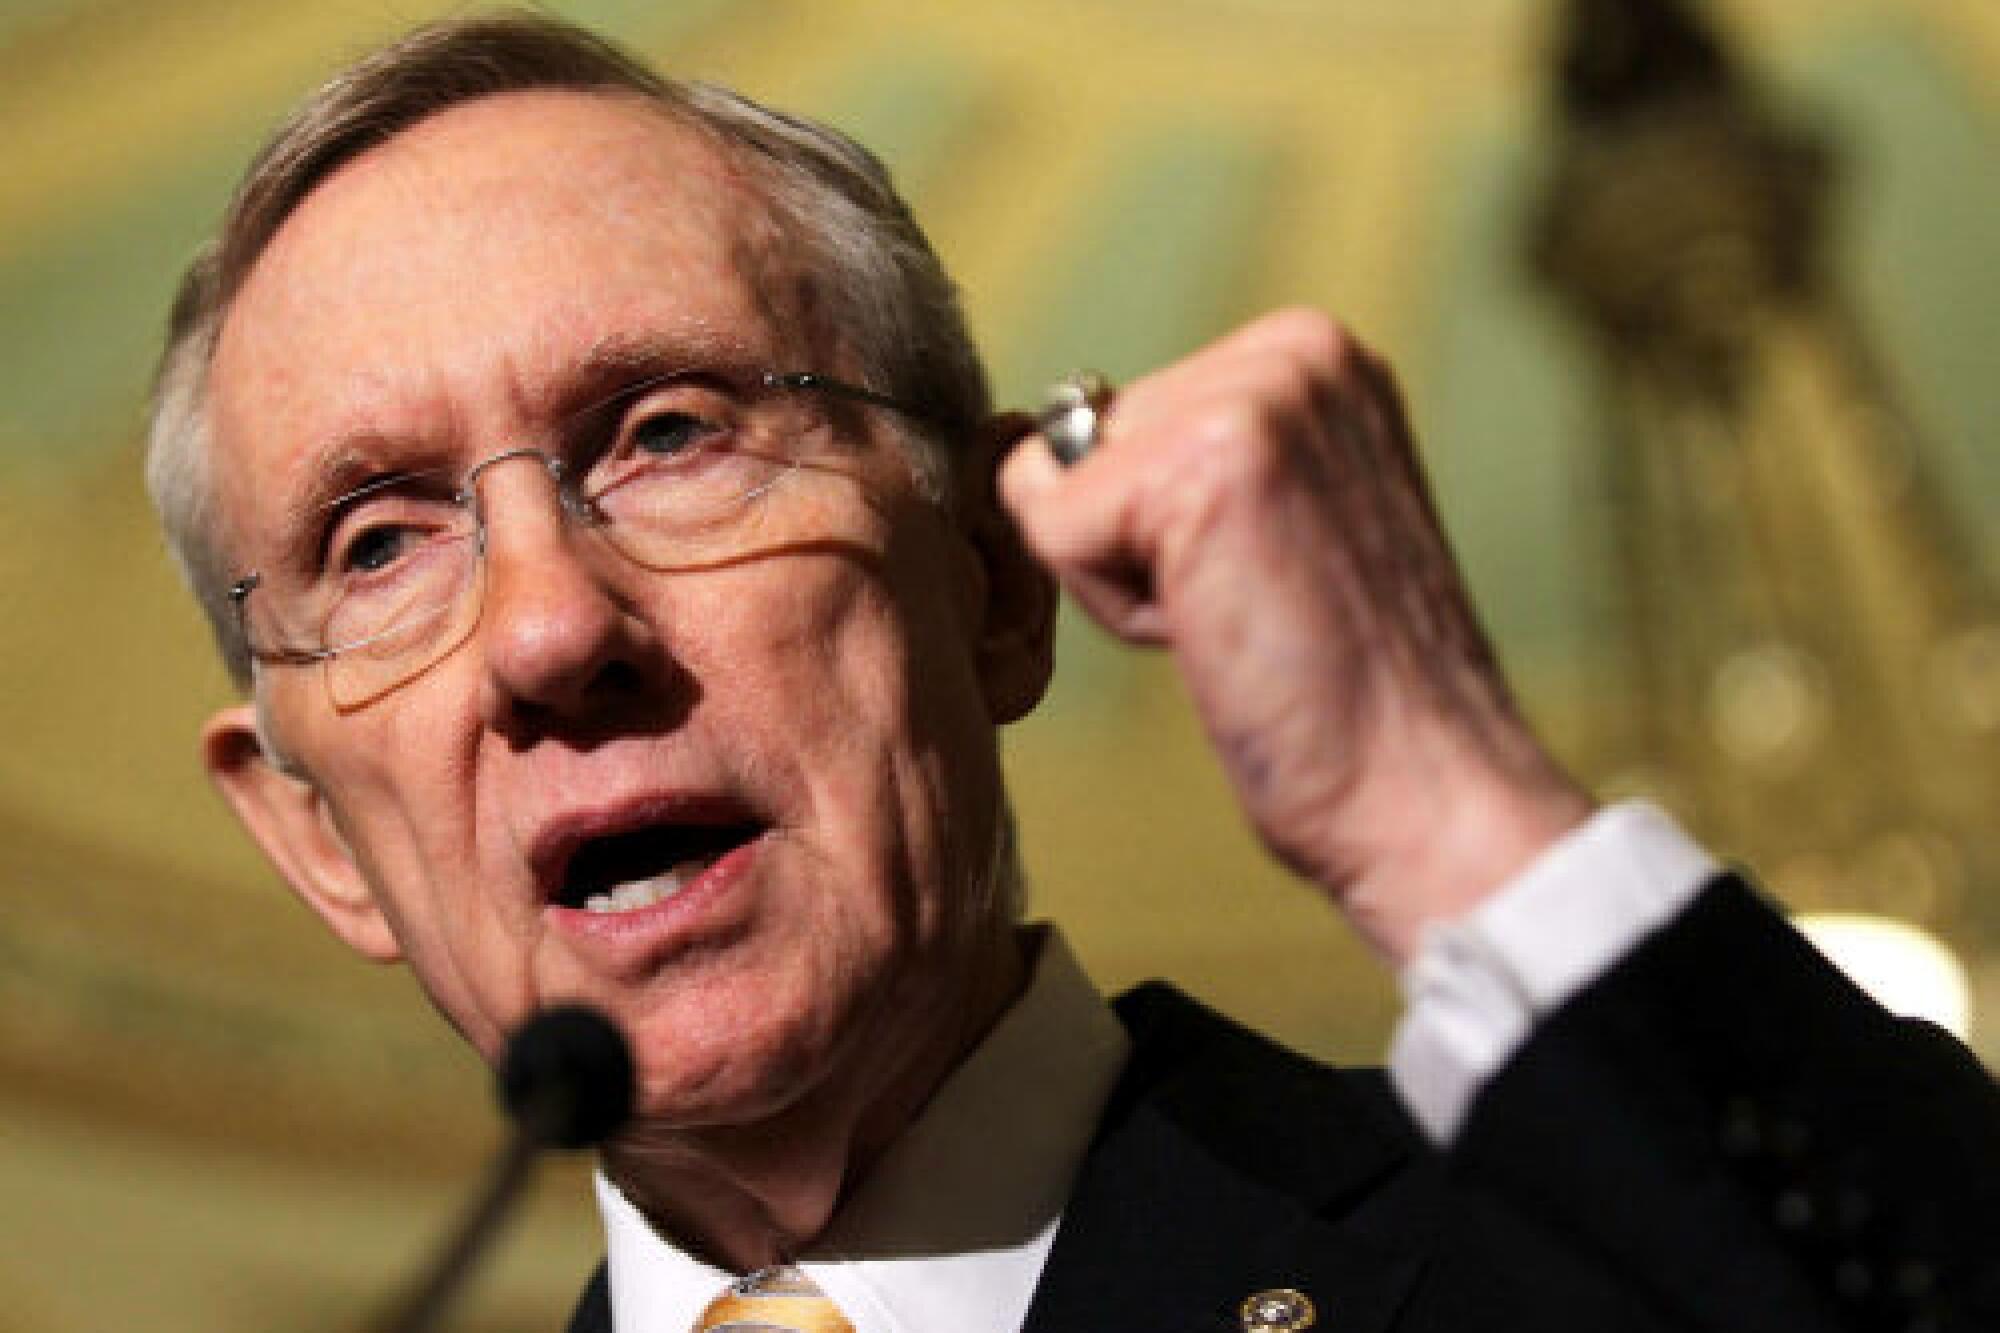 A closeup of then-Senate Majority Leader Harry Reid clenching his left fist as he speaks into a microphone